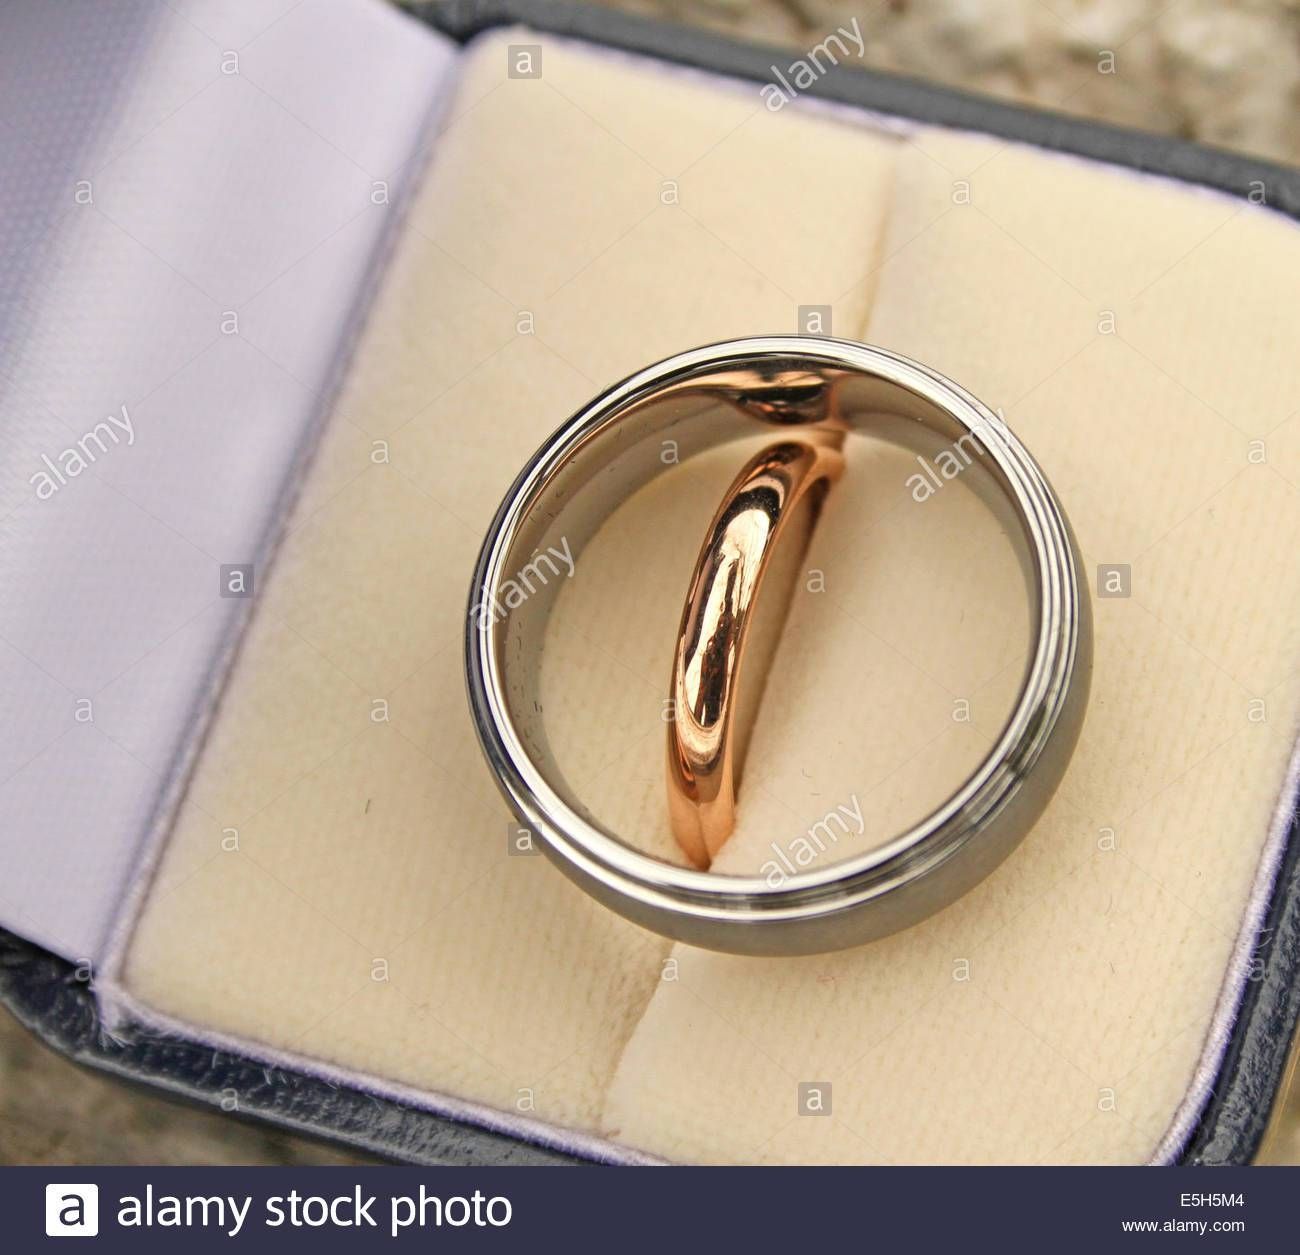 Wedding Rings For The Bride And Groom In A Presentation Box Stock Within Wedding Rings For Groom (View 8 of 15)